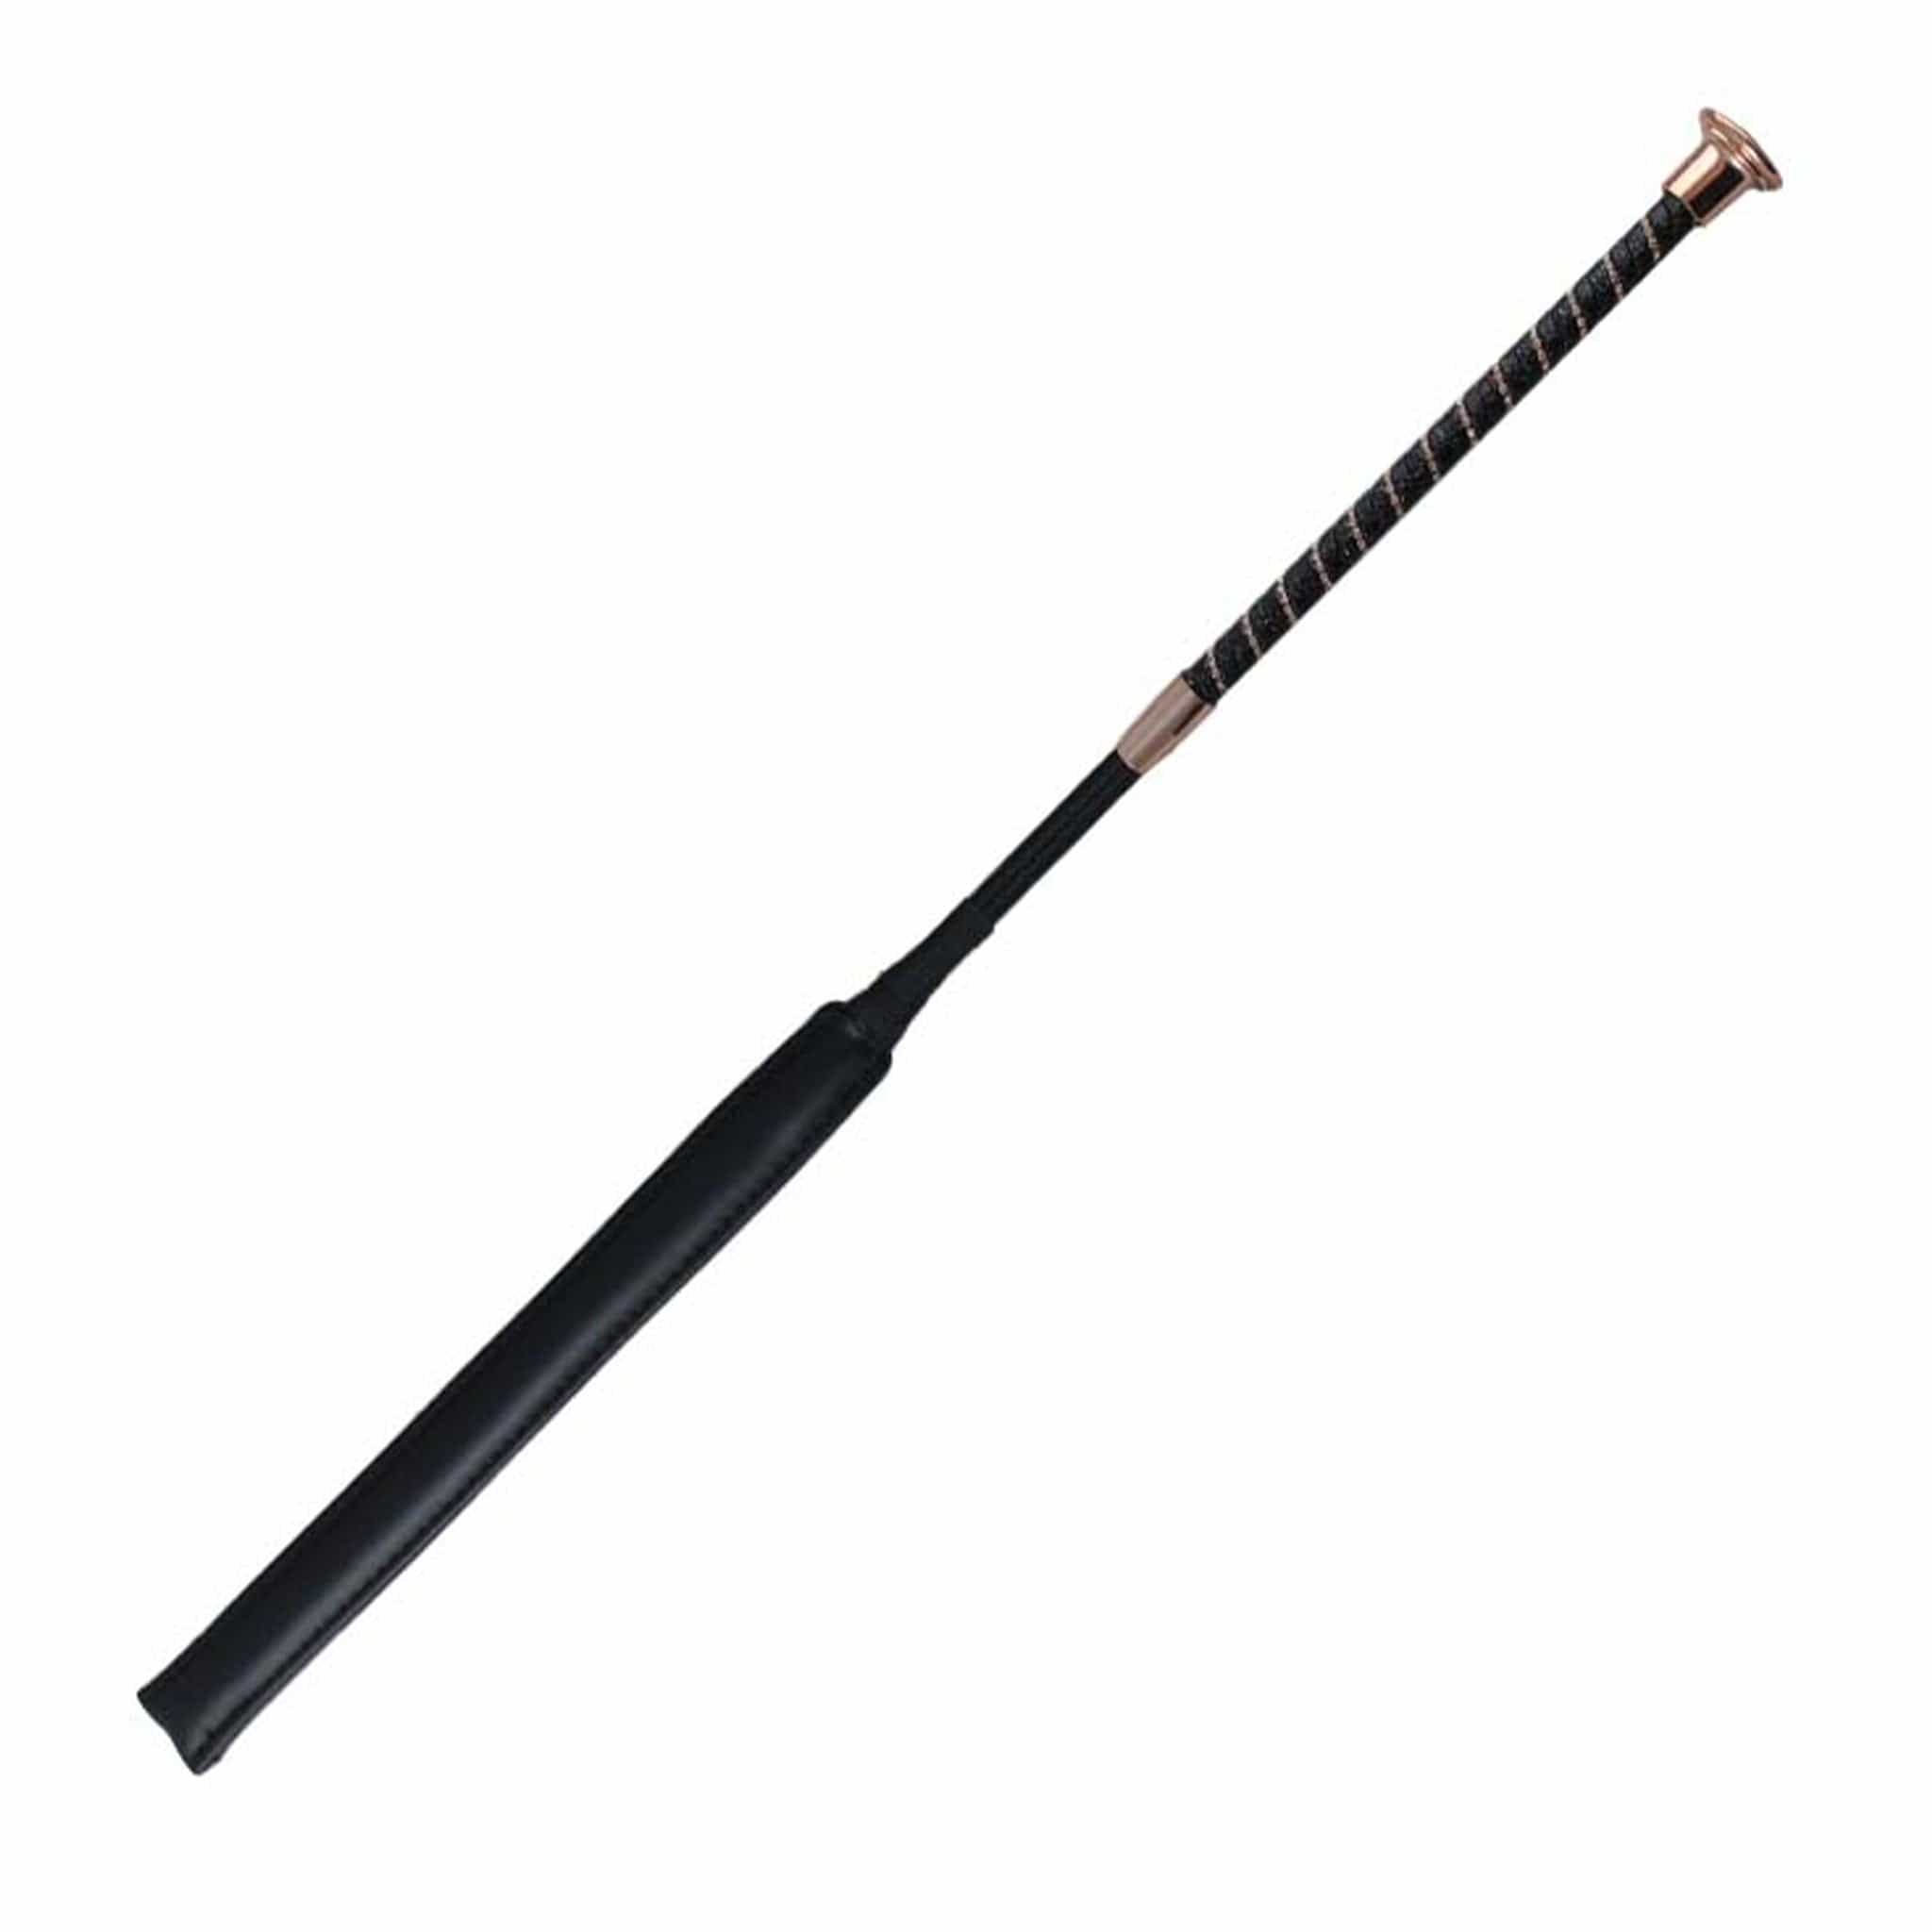 Woof Wear Twisted Jump Bat Black and Rose Gold WH0019